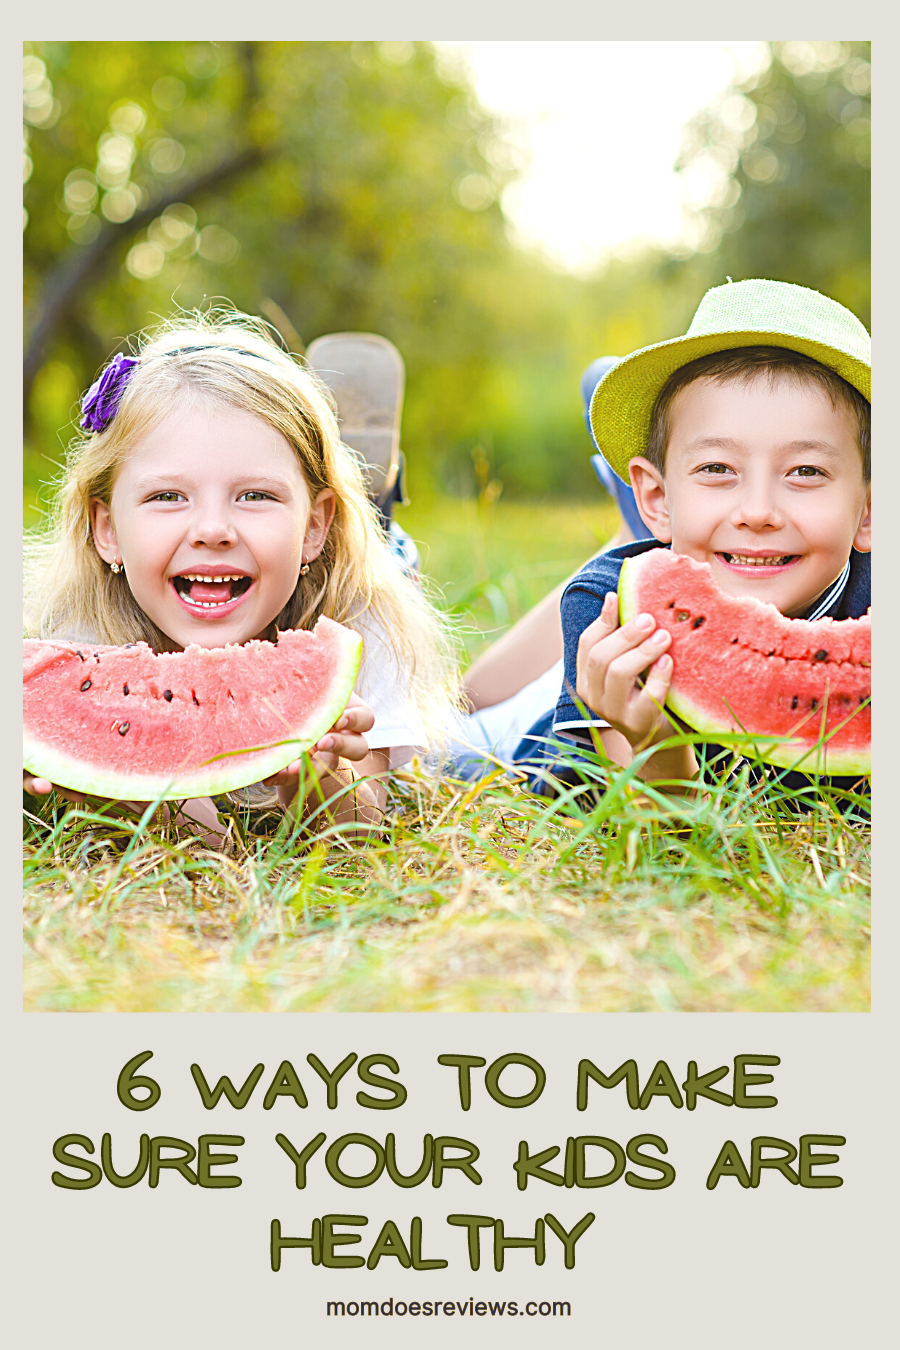 Six Ways to Make Sure Your Kids Are Healthy